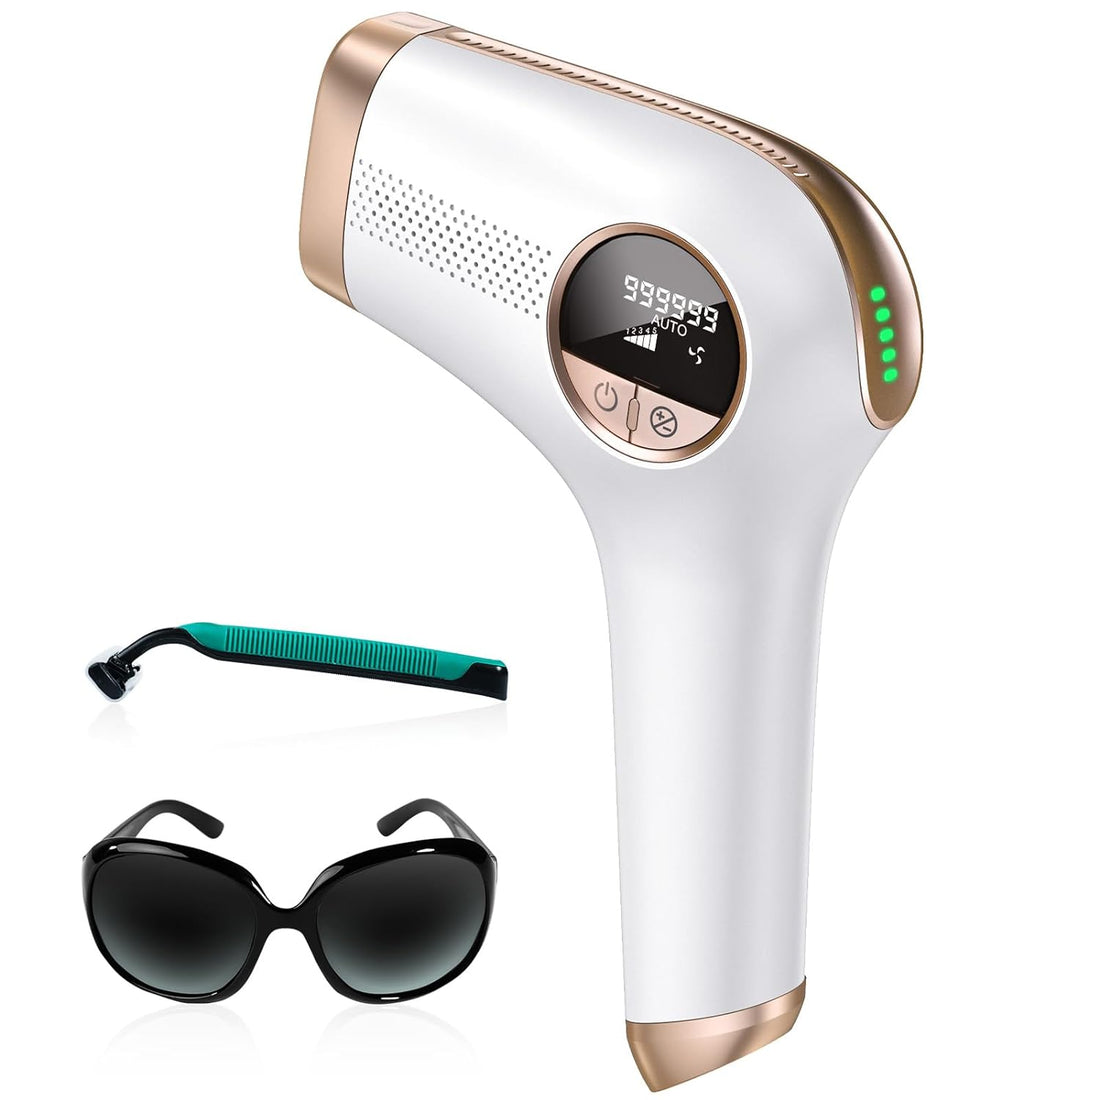 Aopvui Laser Hair Removal for Women, At Home Painless IPL Hair Removal with Red-Wave Light for Bikini Leg Facial Use High Energy IPL Hair Remover Device